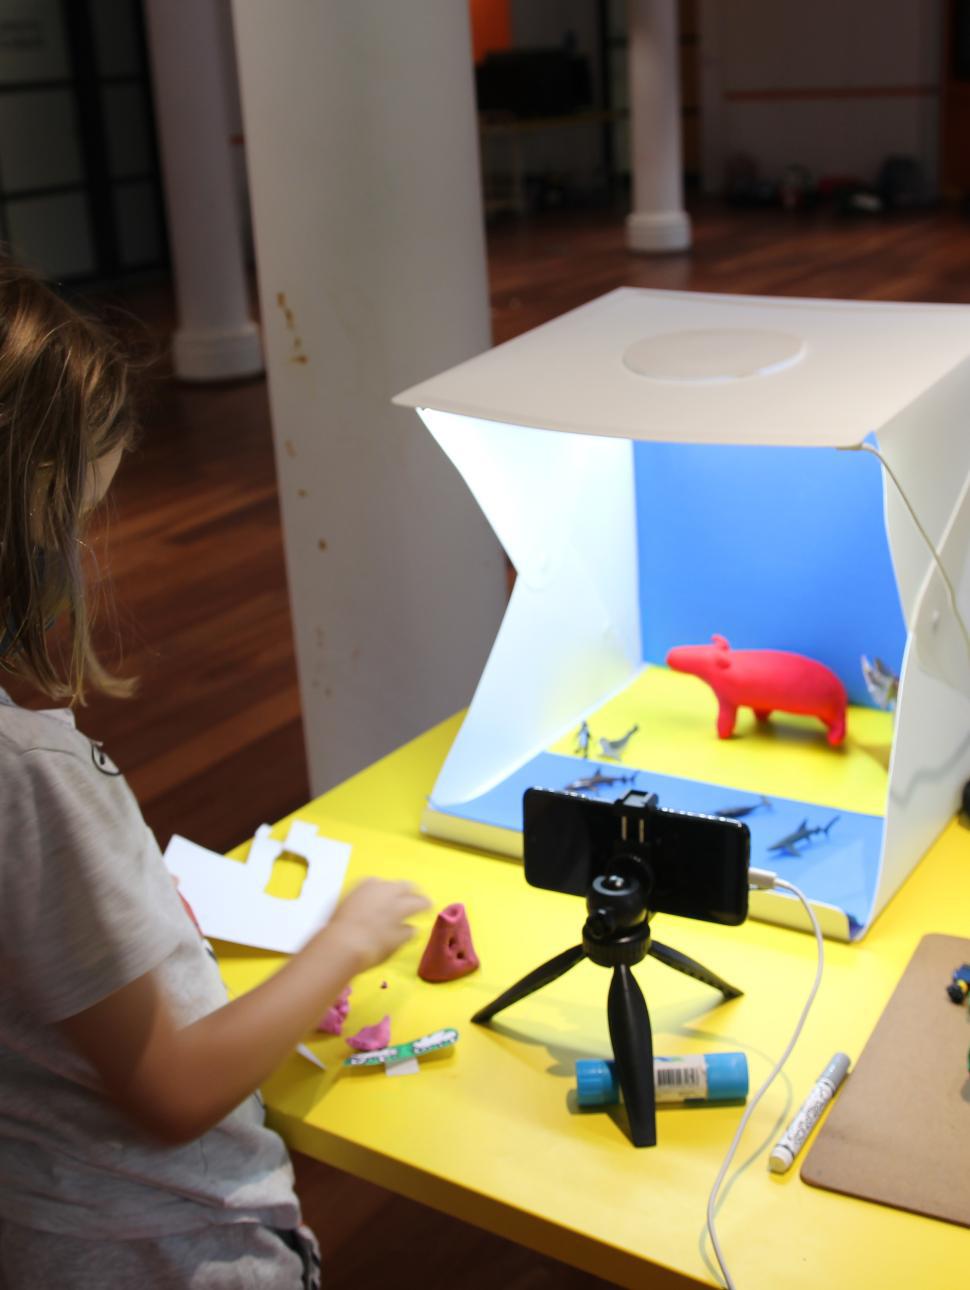 a young child has set up a filming station on a table with lights, a mobile phone and small clay animals in a lightbox